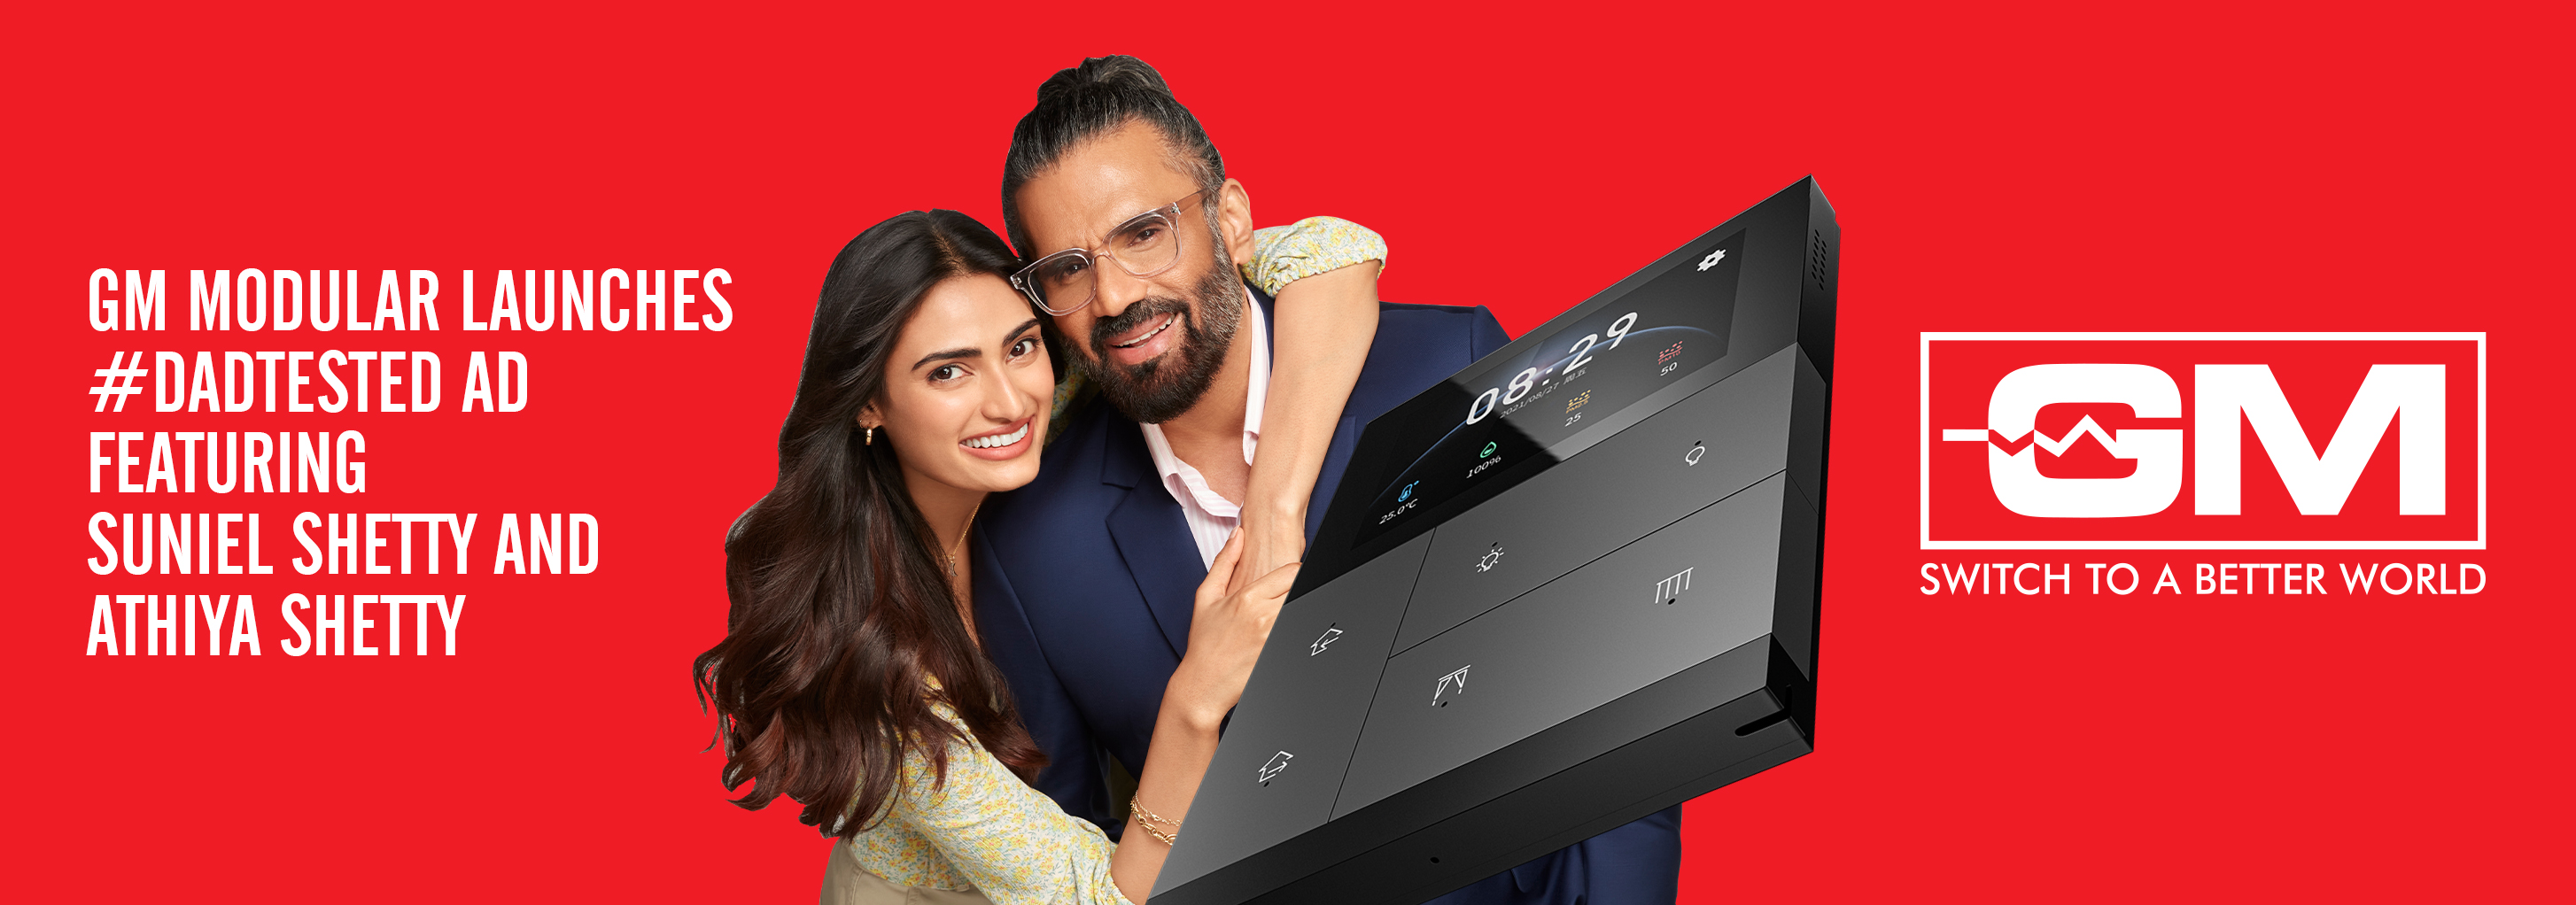 GM Modular launches #DADTESTED ad featuring Suniel Shetty and Athiya Shetty - Published By Financial Express